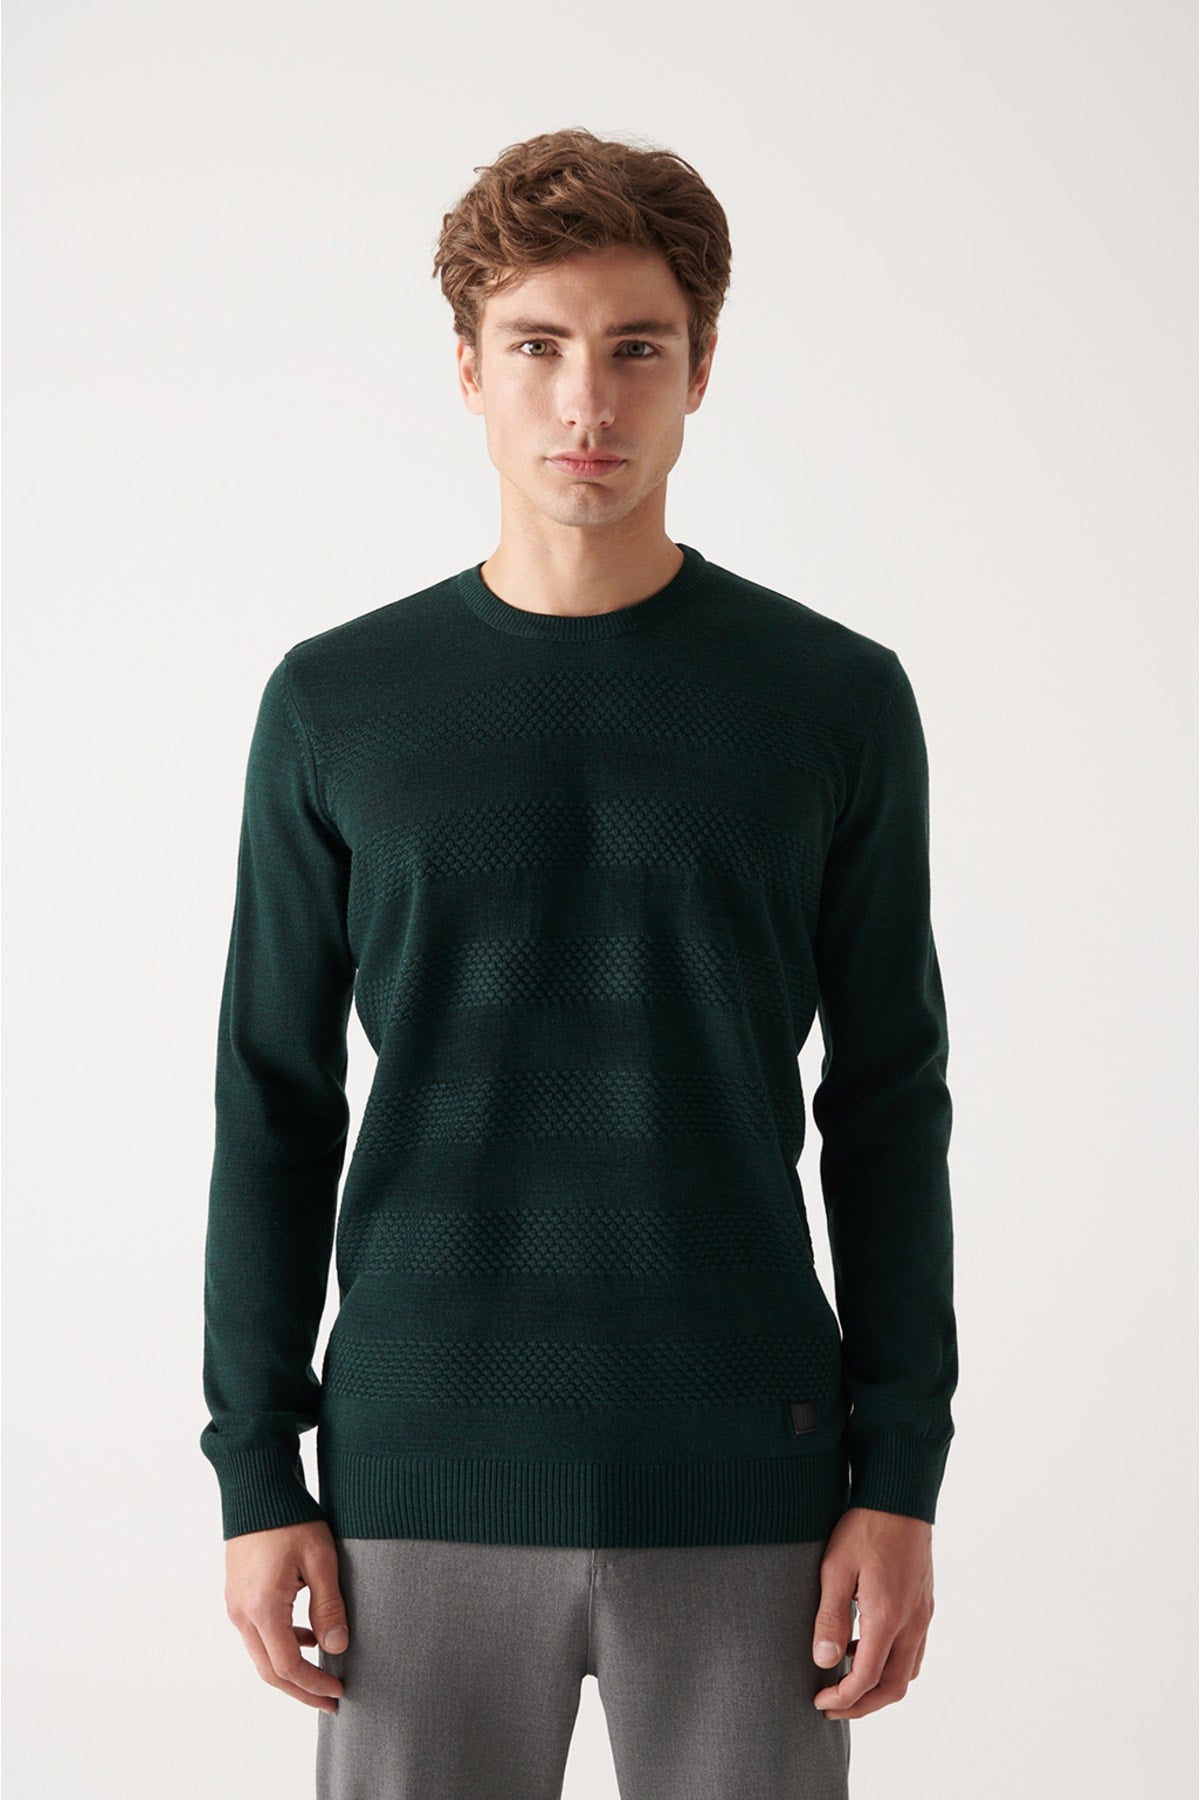 Men's Green Bicycle Neck Honeycomb textured knitwear sweater A22y5073